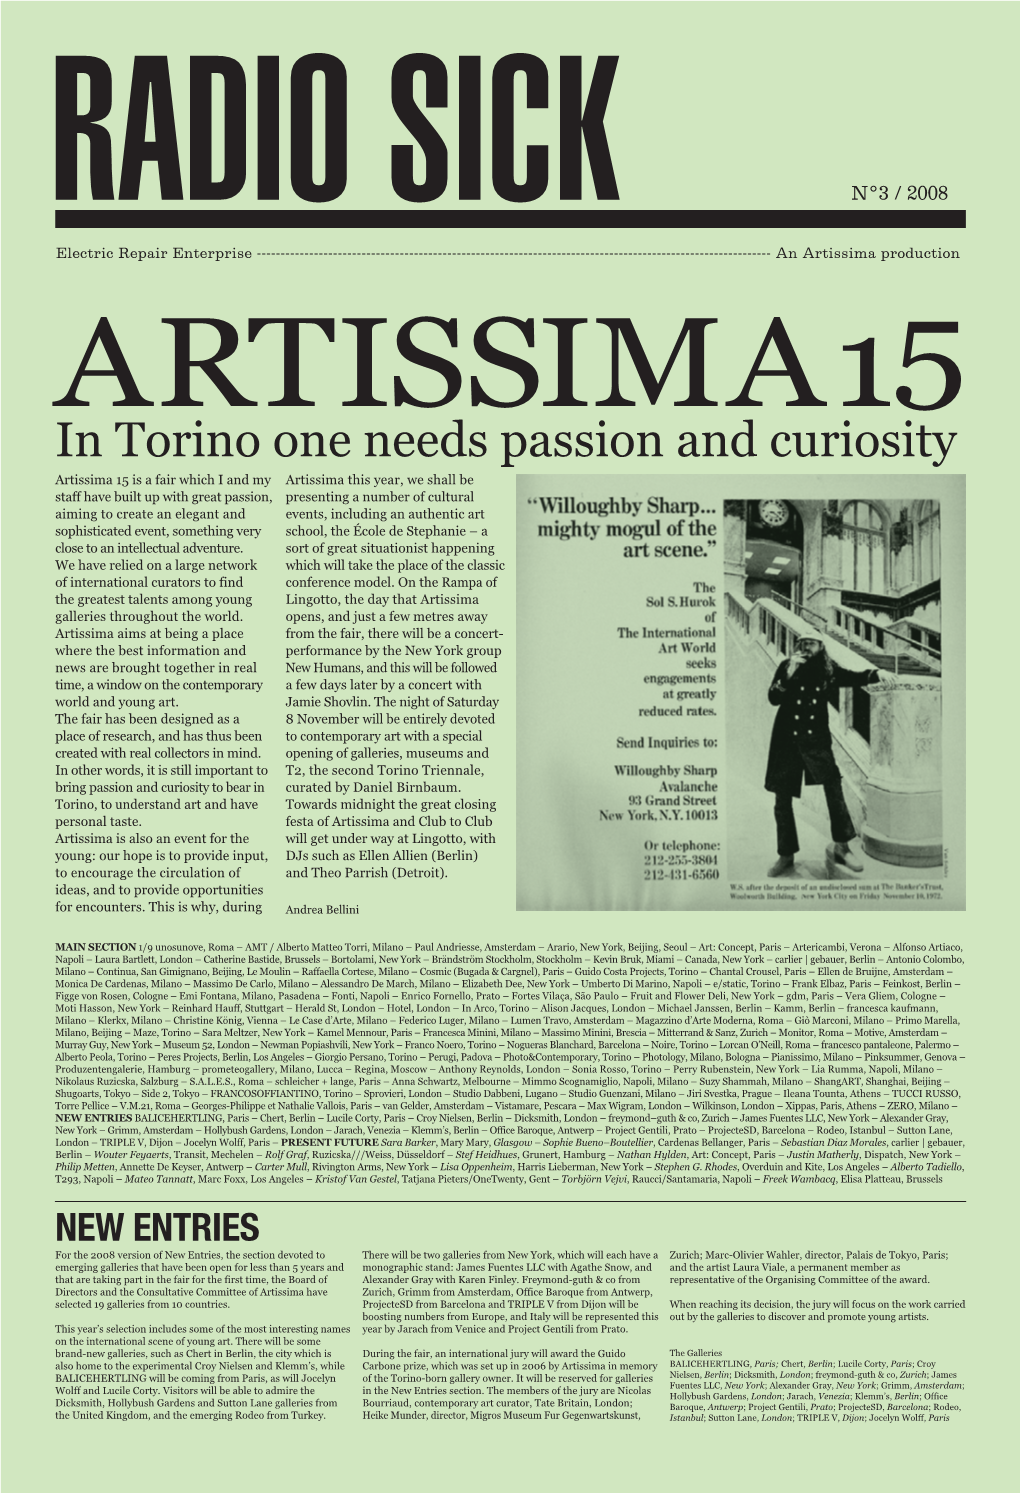 In Torino One Needs Passion and Curiosity